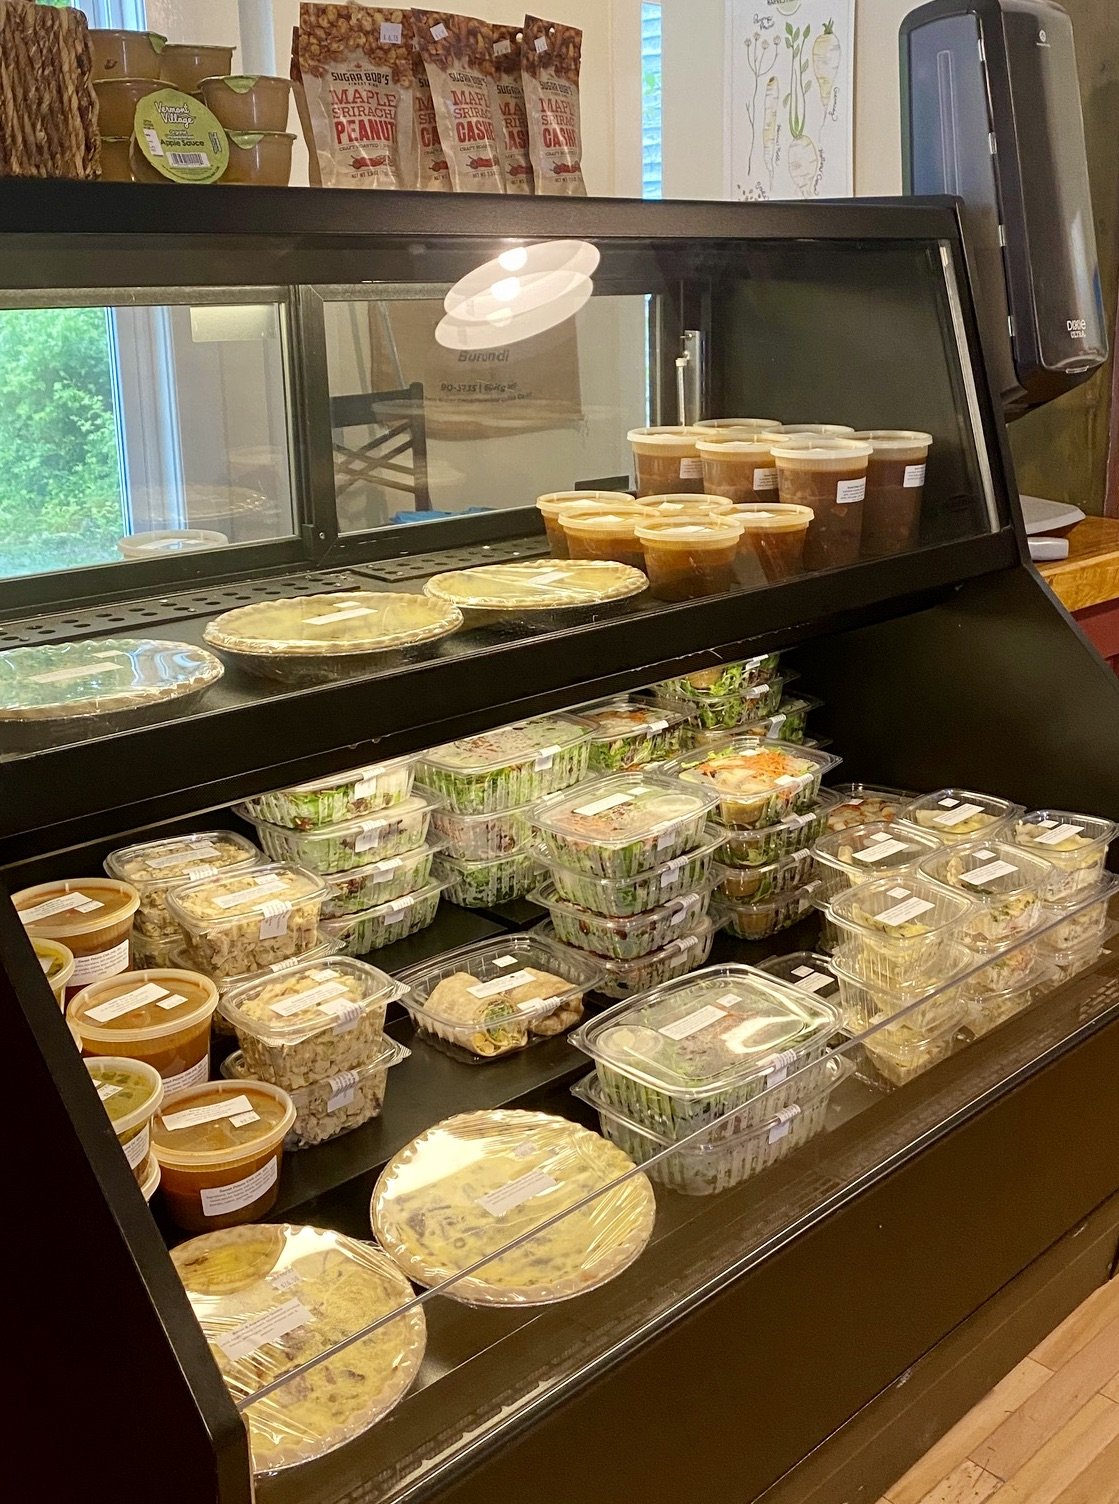 Grab 'n' go meals available during market hours.